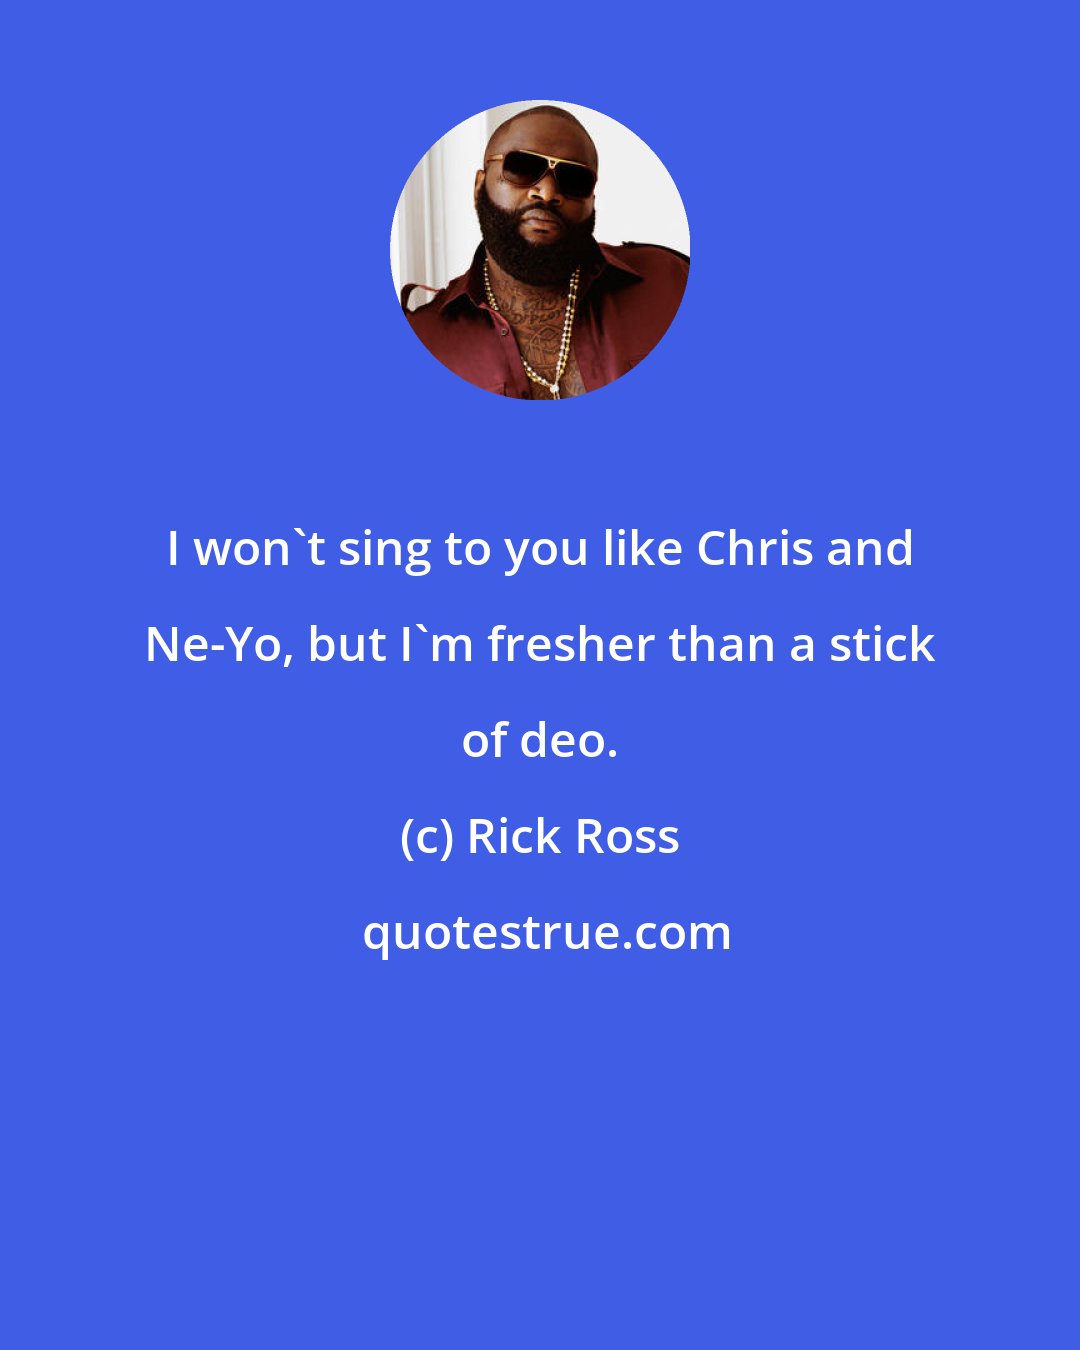 Rick Ross: I won't sing to you like Chris and Ne-Yo, but I'm fresher than a stick of deo.